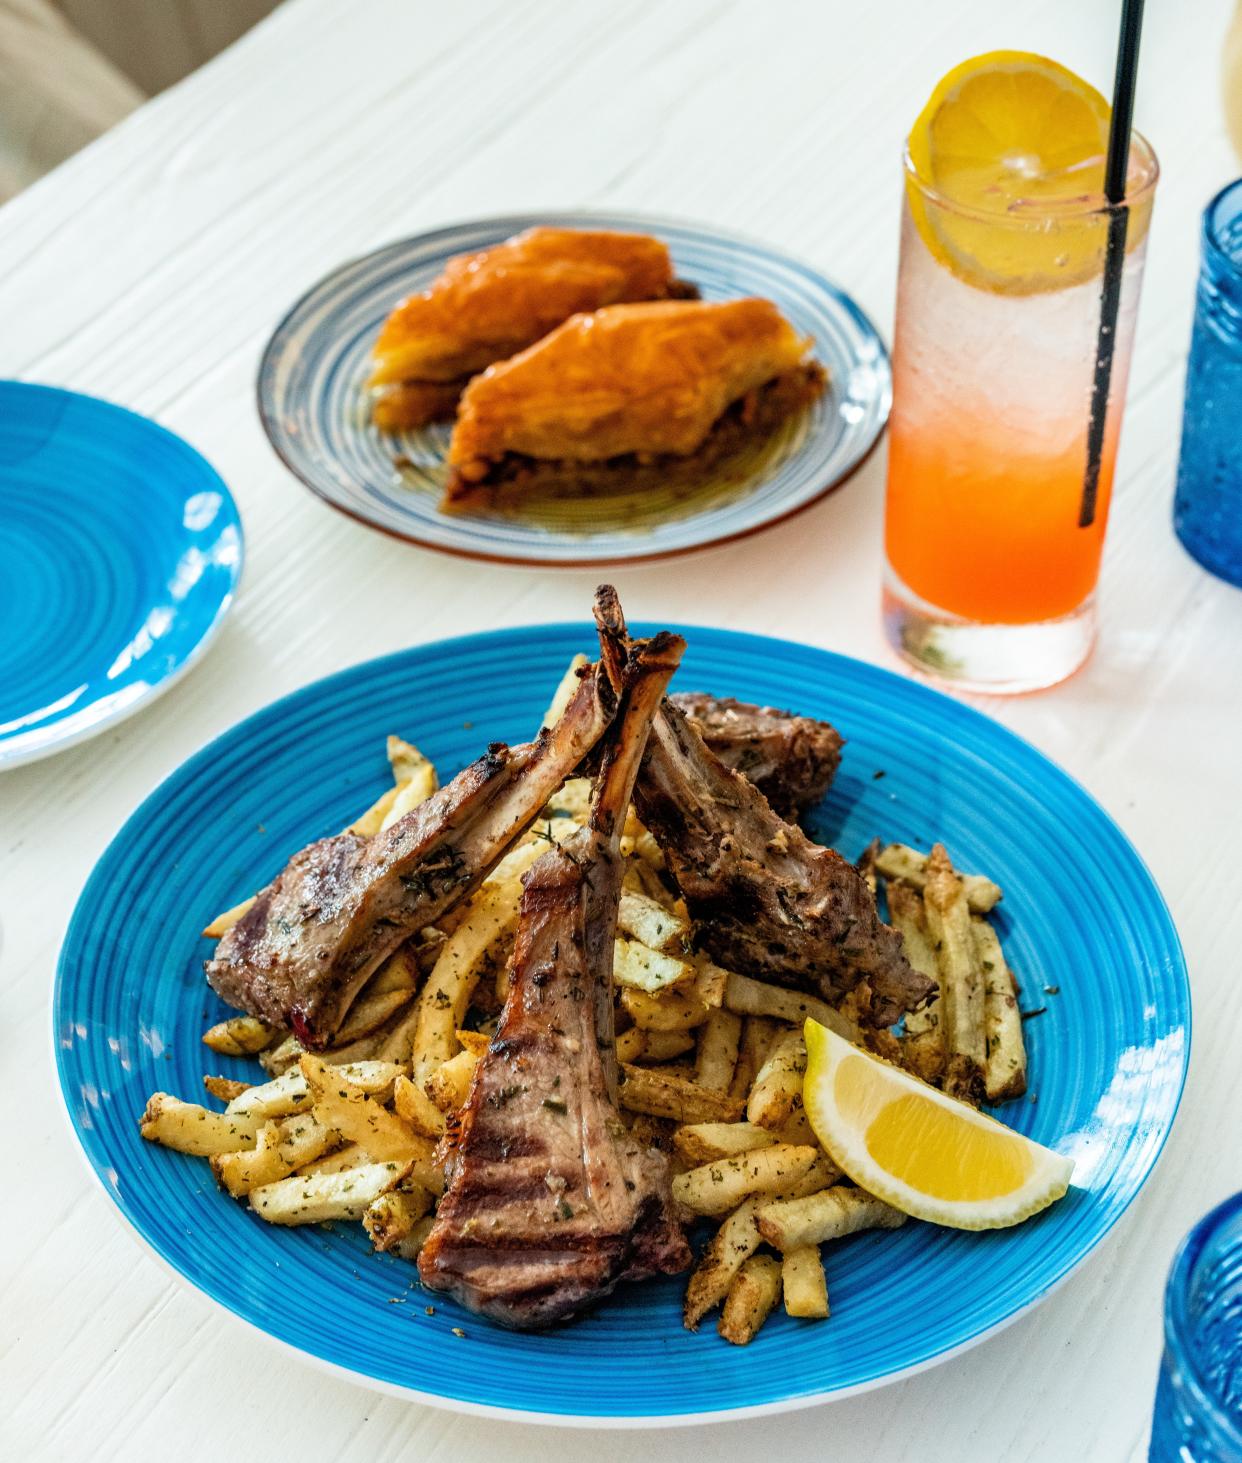 Don't miss the lamb chops when you visit Yamas Greek restaurant.